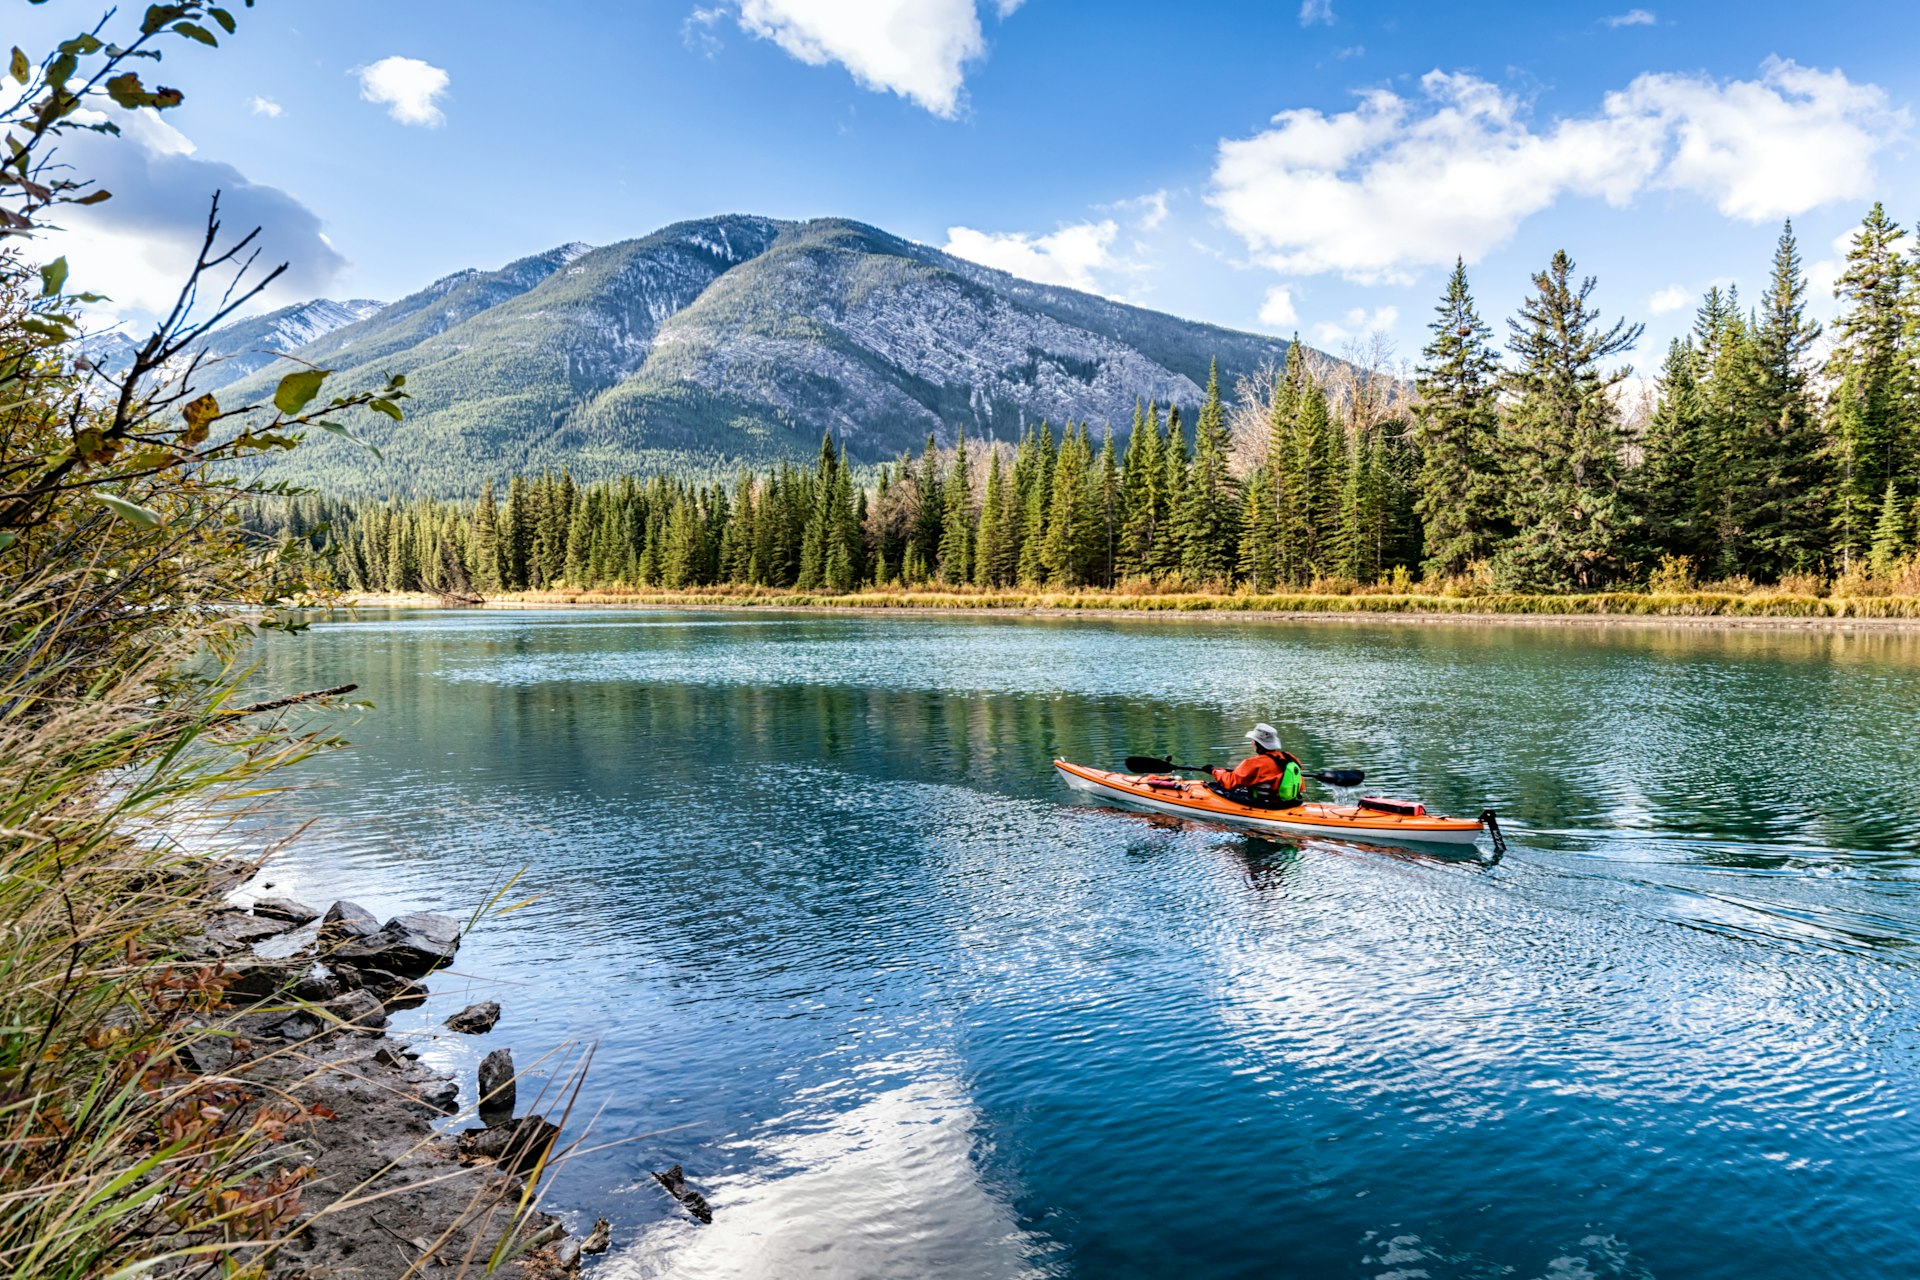 Kayaker on the Bow river near Banff